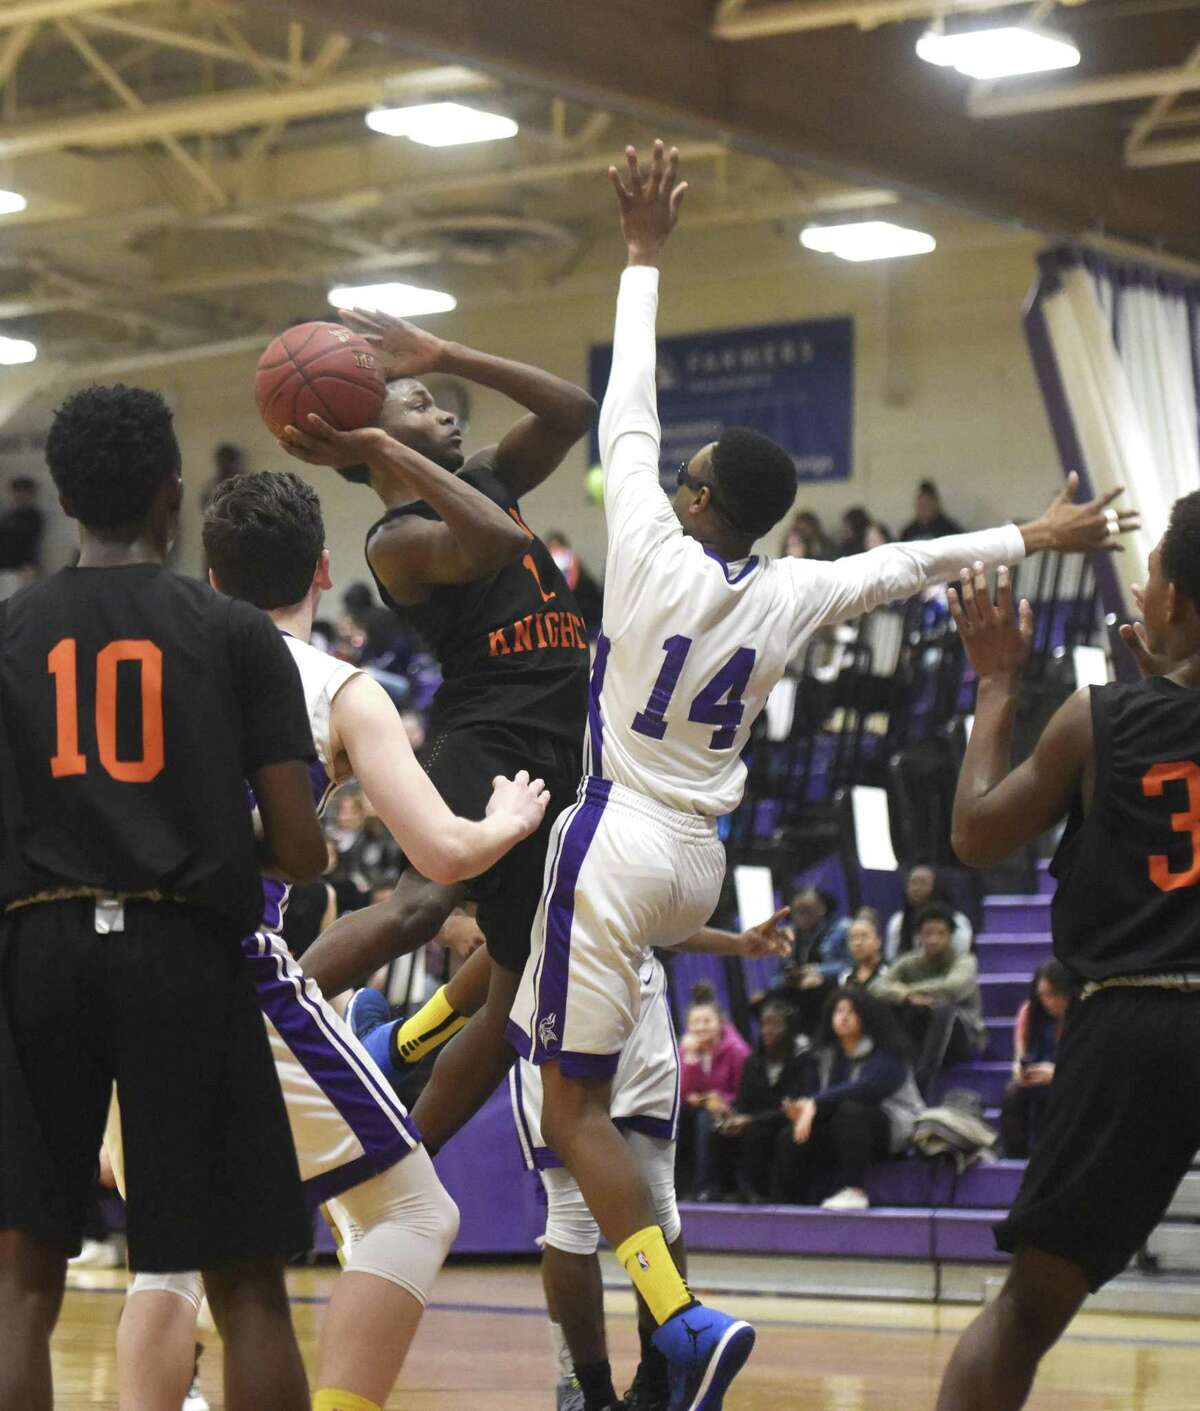 Stamford's Joh Thervil (1) goes up for a layup defended by Westhill's D'Aeren Carson (14) in the high school boys basketball game between Westhill and Stamford at Westhill High School in Stamford, Conn. Monday, Feb. 12, 2018.